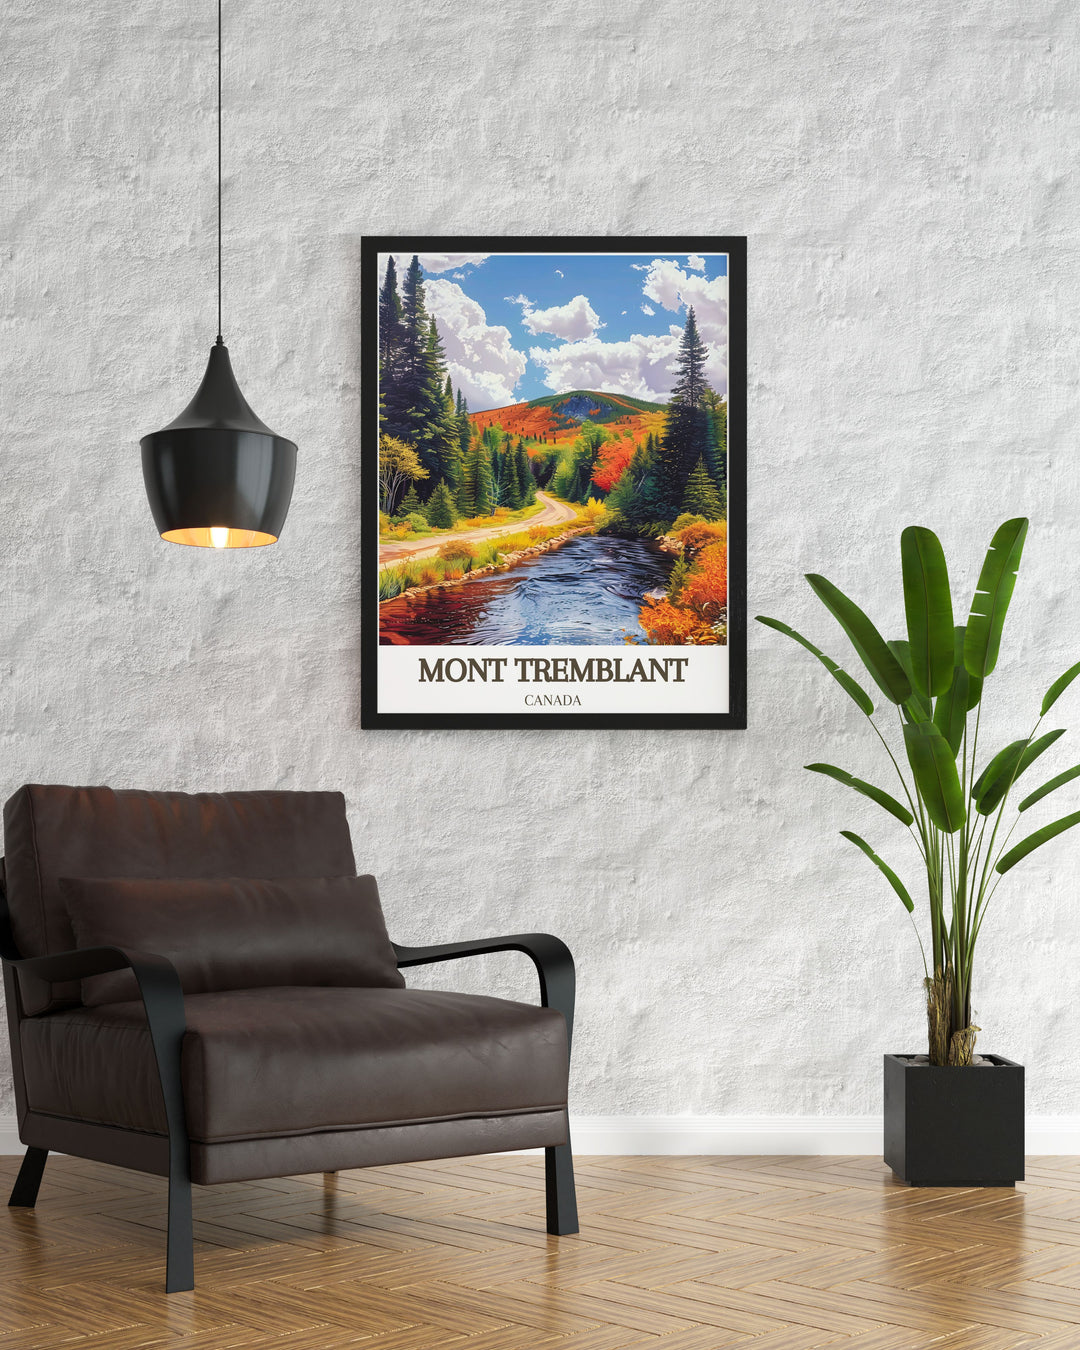 Vintage ski poster of Mont Tremblant National Park showcasing the majestic Laurentian Mountains and serene snowy slopes an ideal addition to any ski enthusiasts collection or as a captivating piece of wall art for nature lovers and adventure seekers.